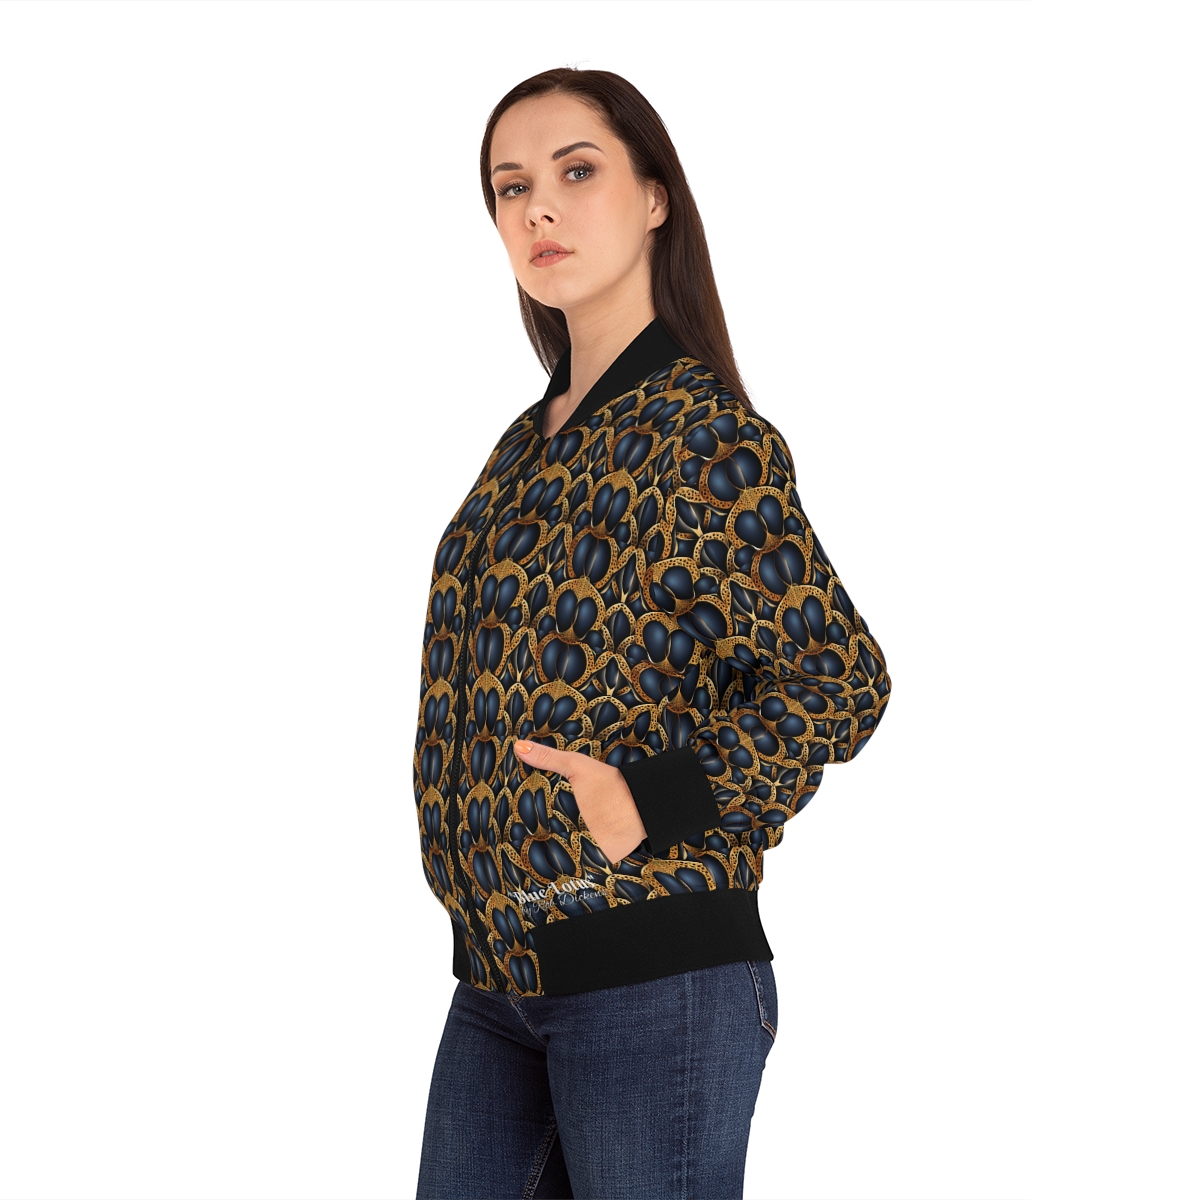 The "Blue Lotus" Bomber by Rob Dickens - Women's Bomber Jacket product main image